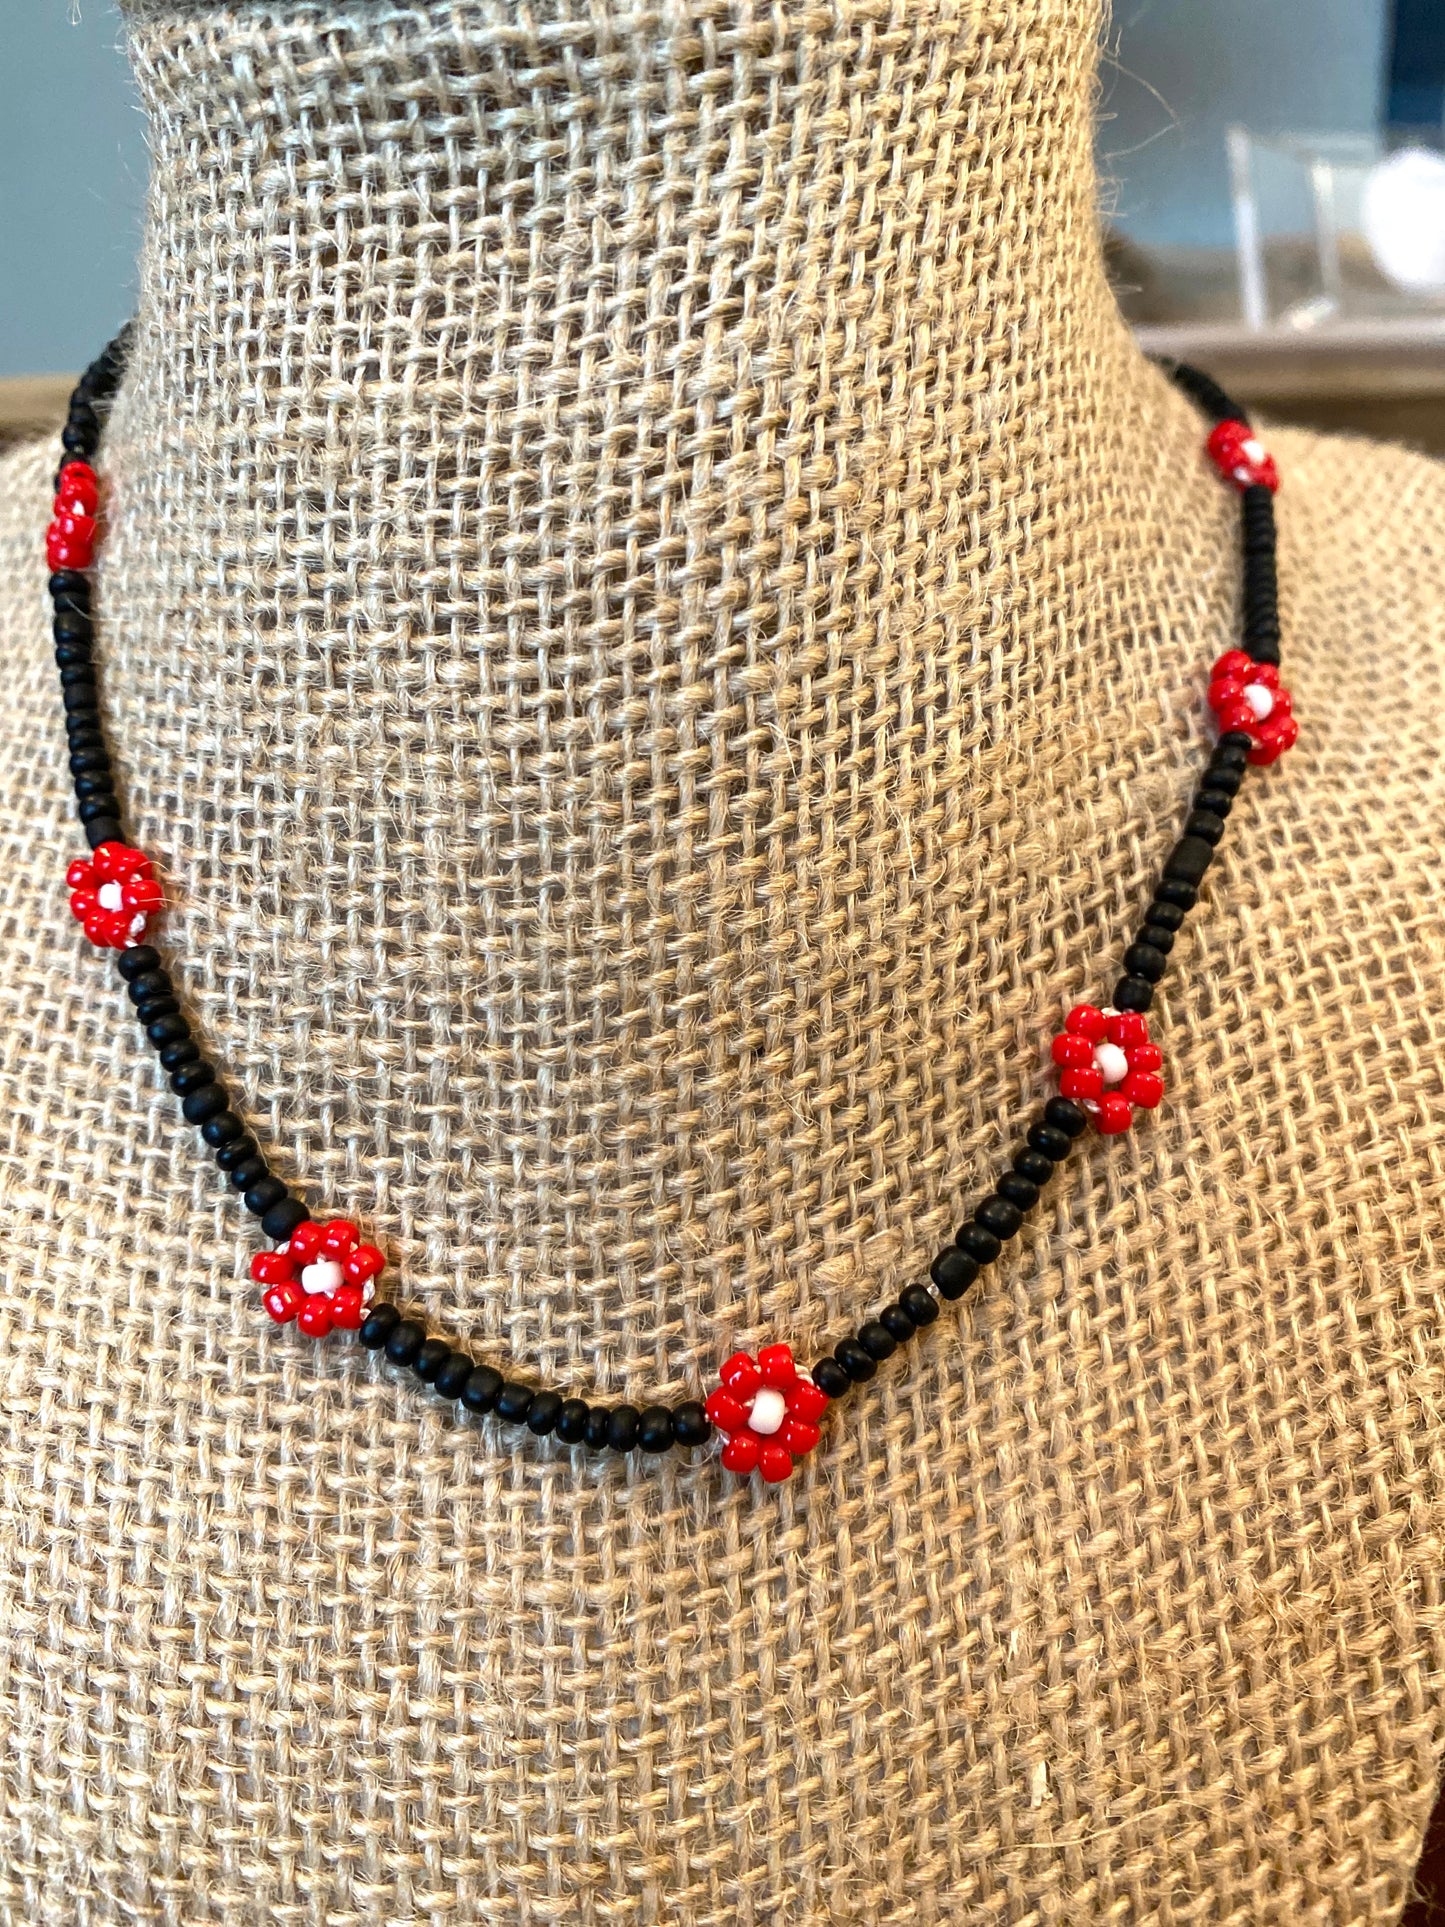 Tiny Black Beaded Daisy Chain Necklace With Red and White Flowers.